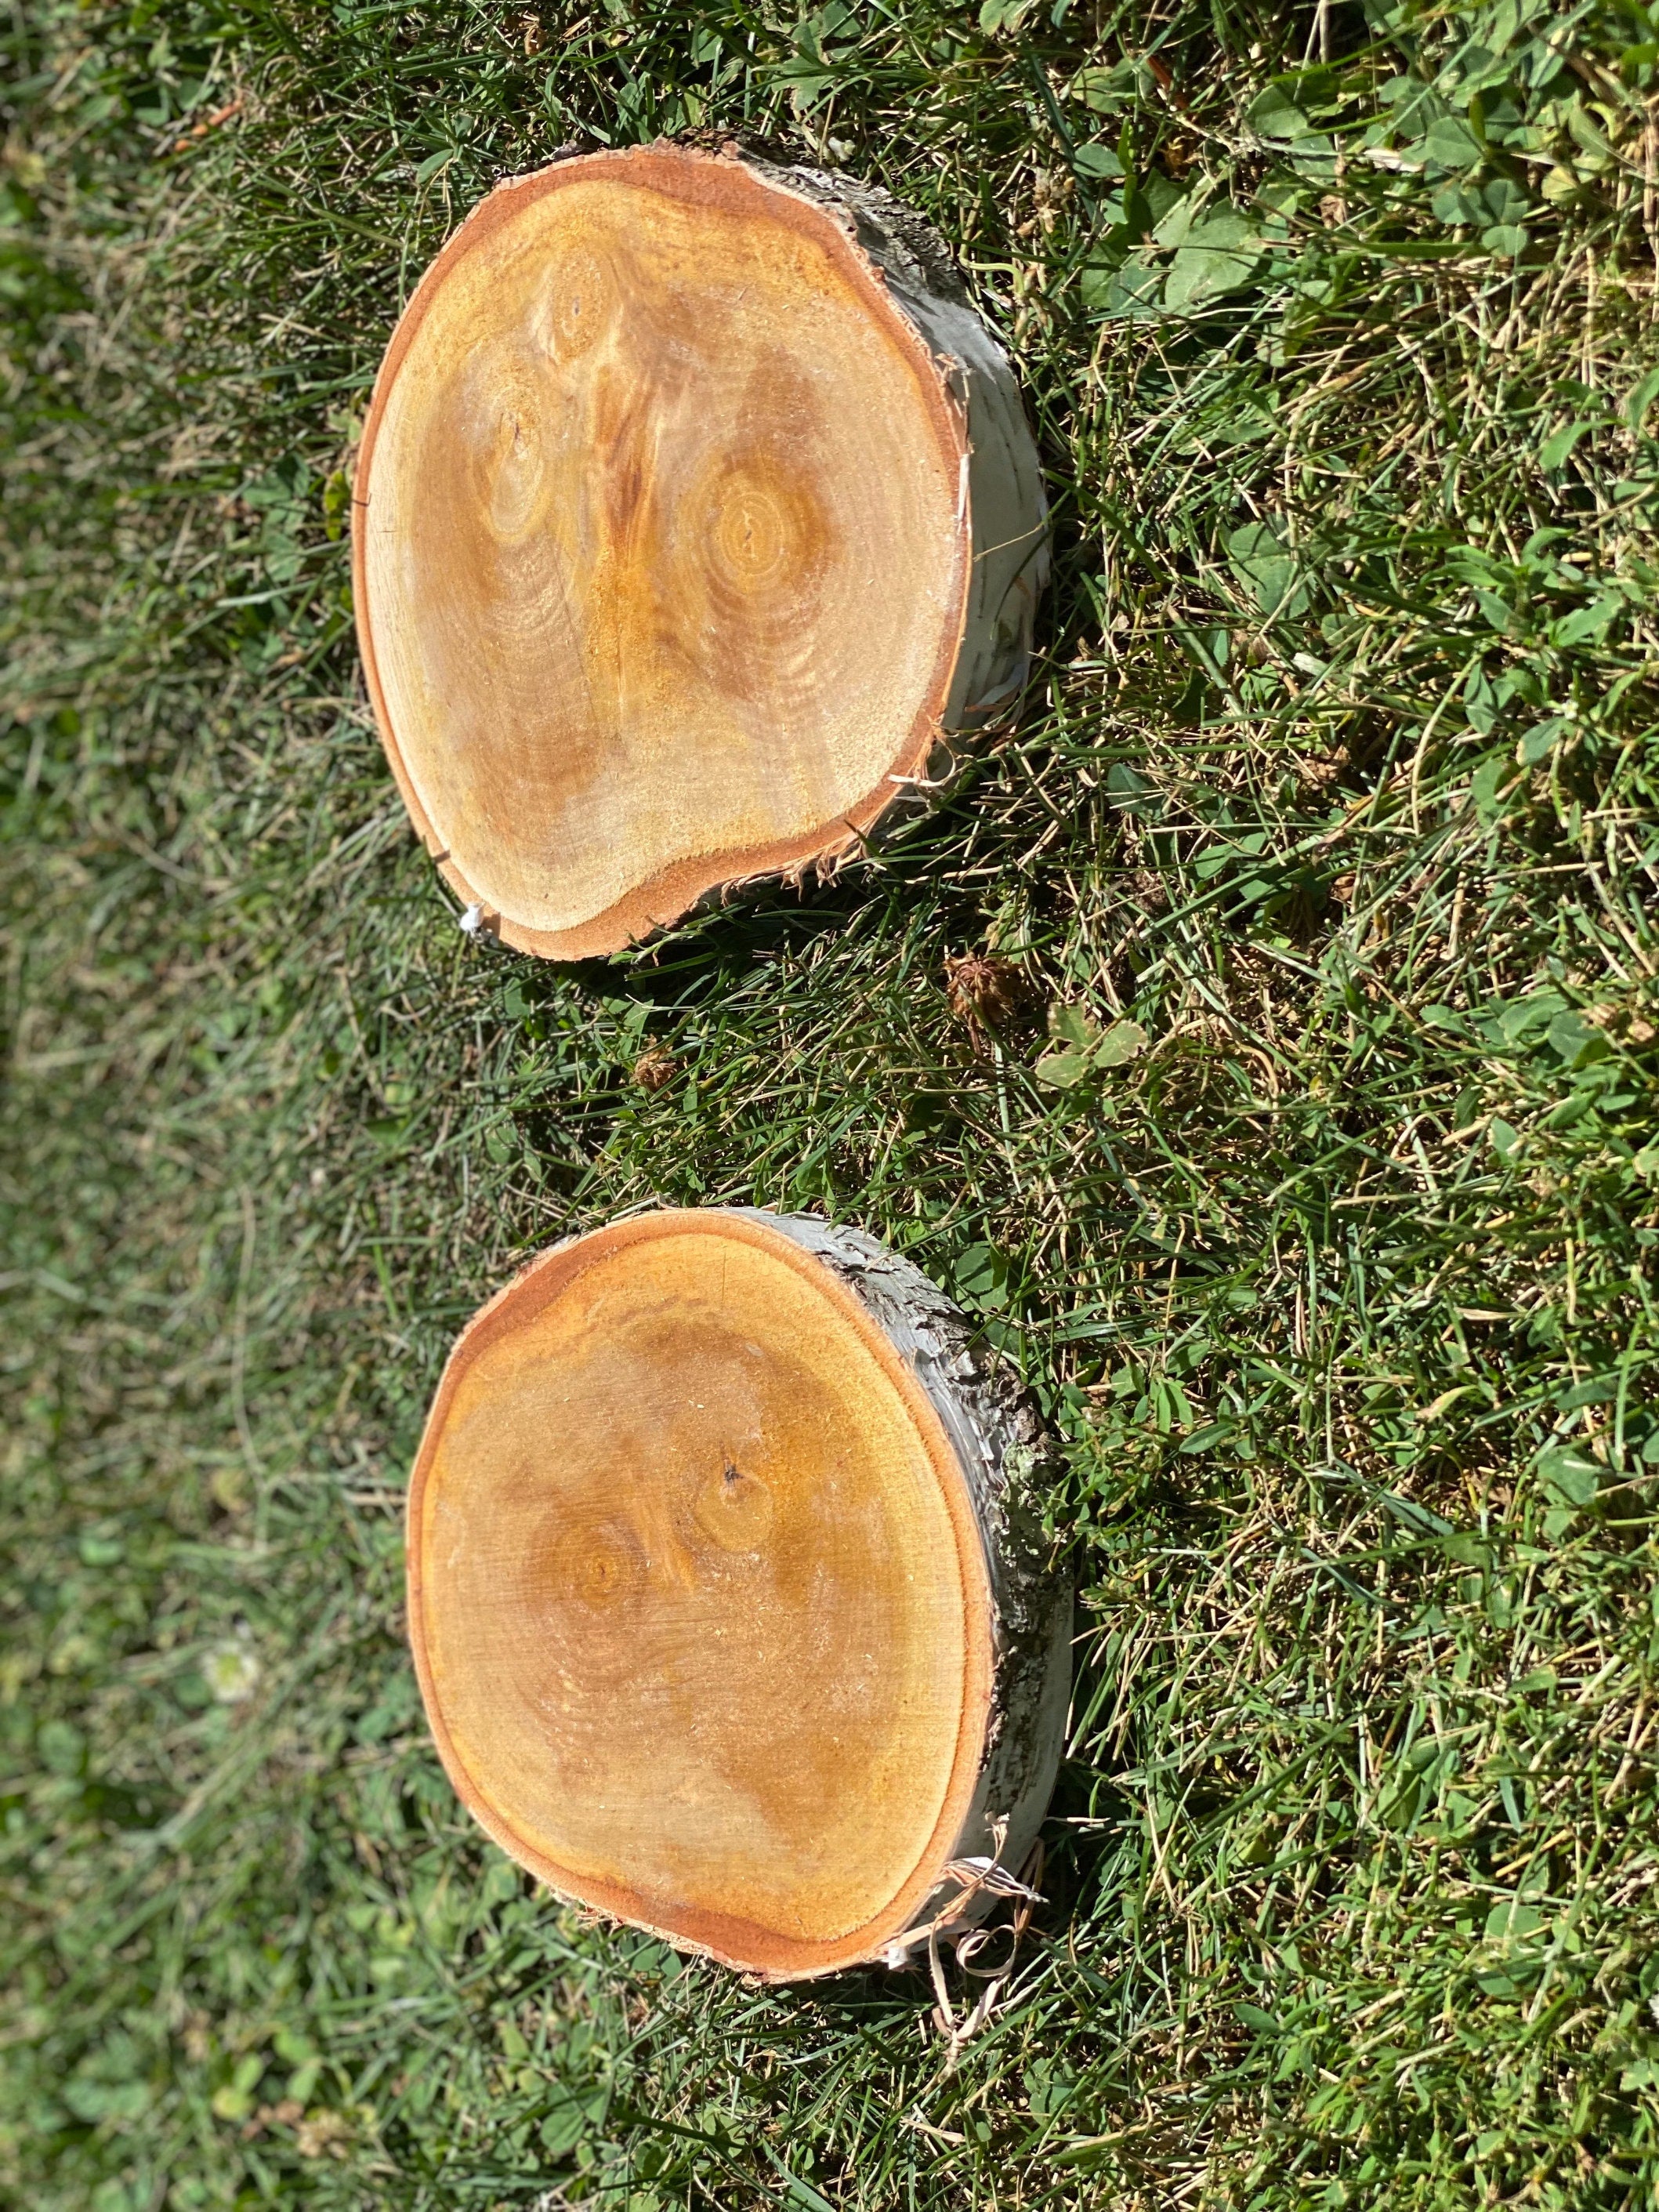 Two White Birch Discs, Approximately 6 Inches Long by 4-5 Inches Wide and 1 Inch Thick